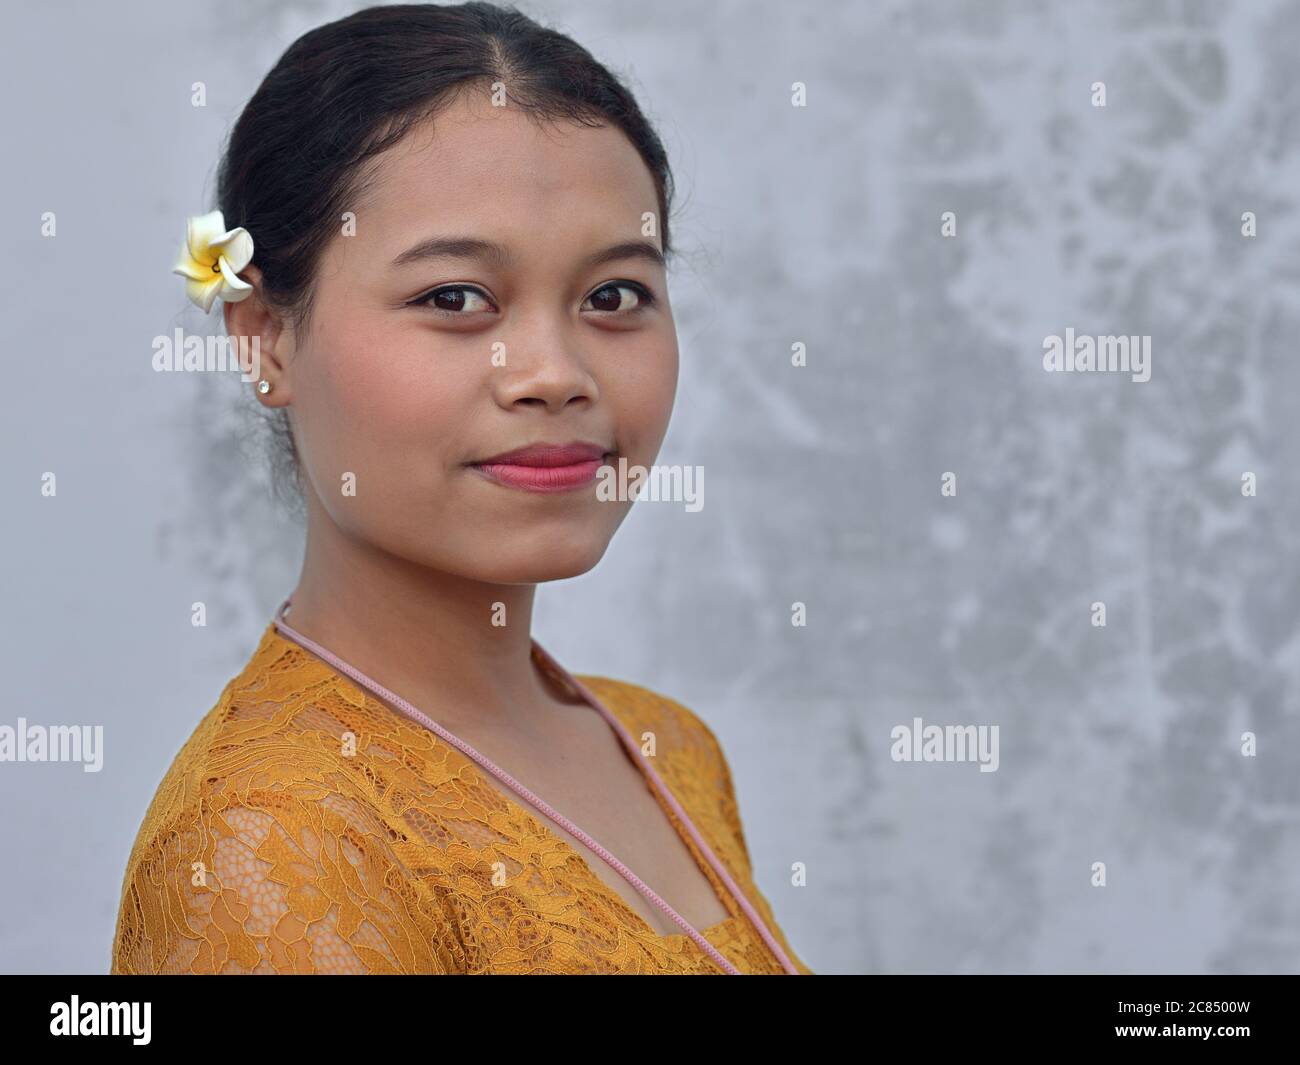 Young Balinese woman wears a Frangipani (Plumeria) flower in her hair and poses for the camera. Stock Photo